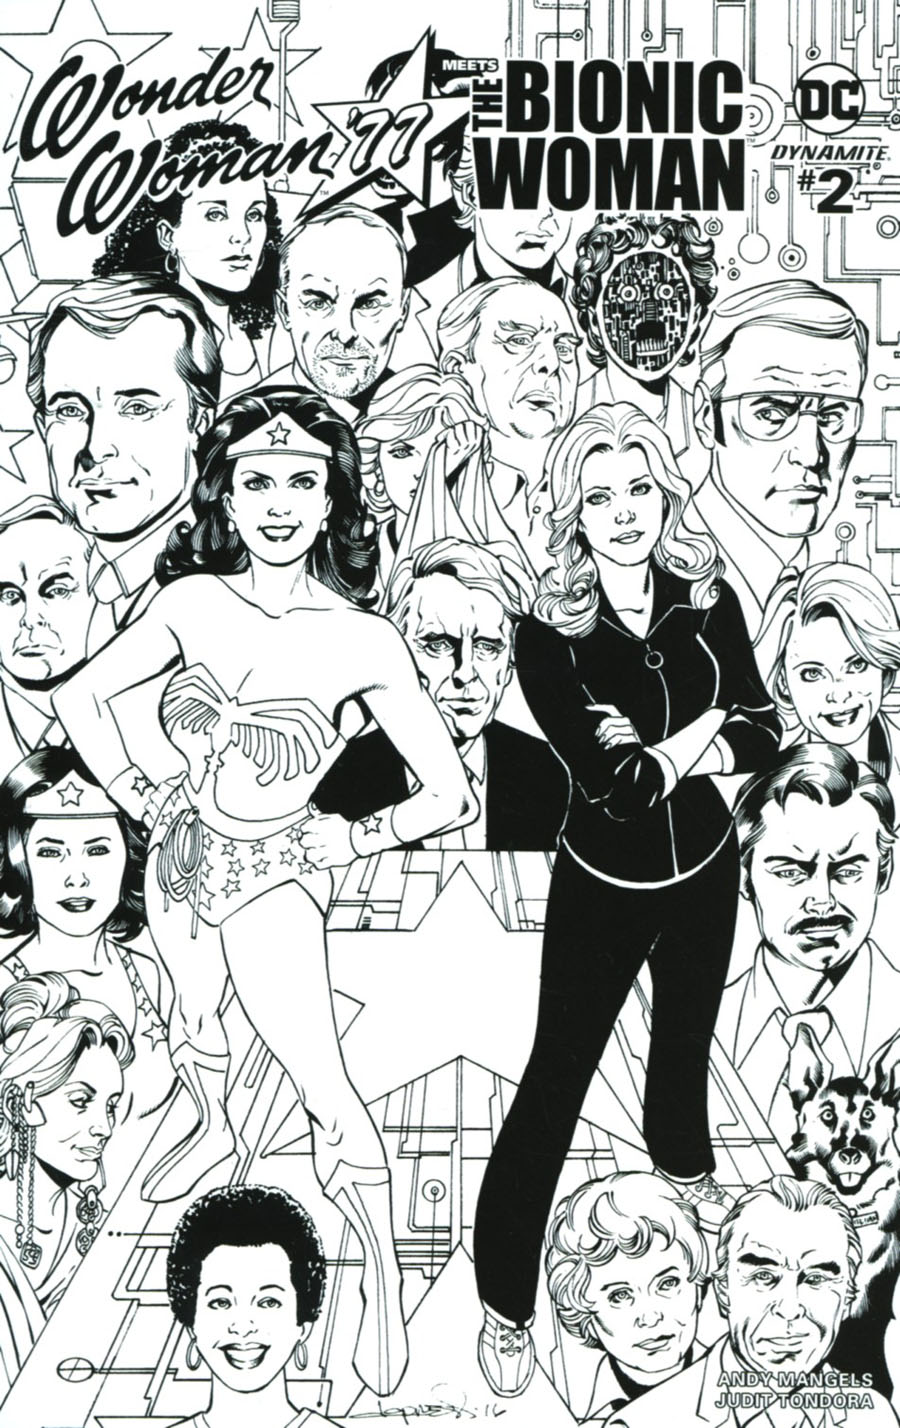 Wonder Woman 77 Meets The Bionic Woman #2 Cover D Incentive Aaron Lopresti Black & White Cover